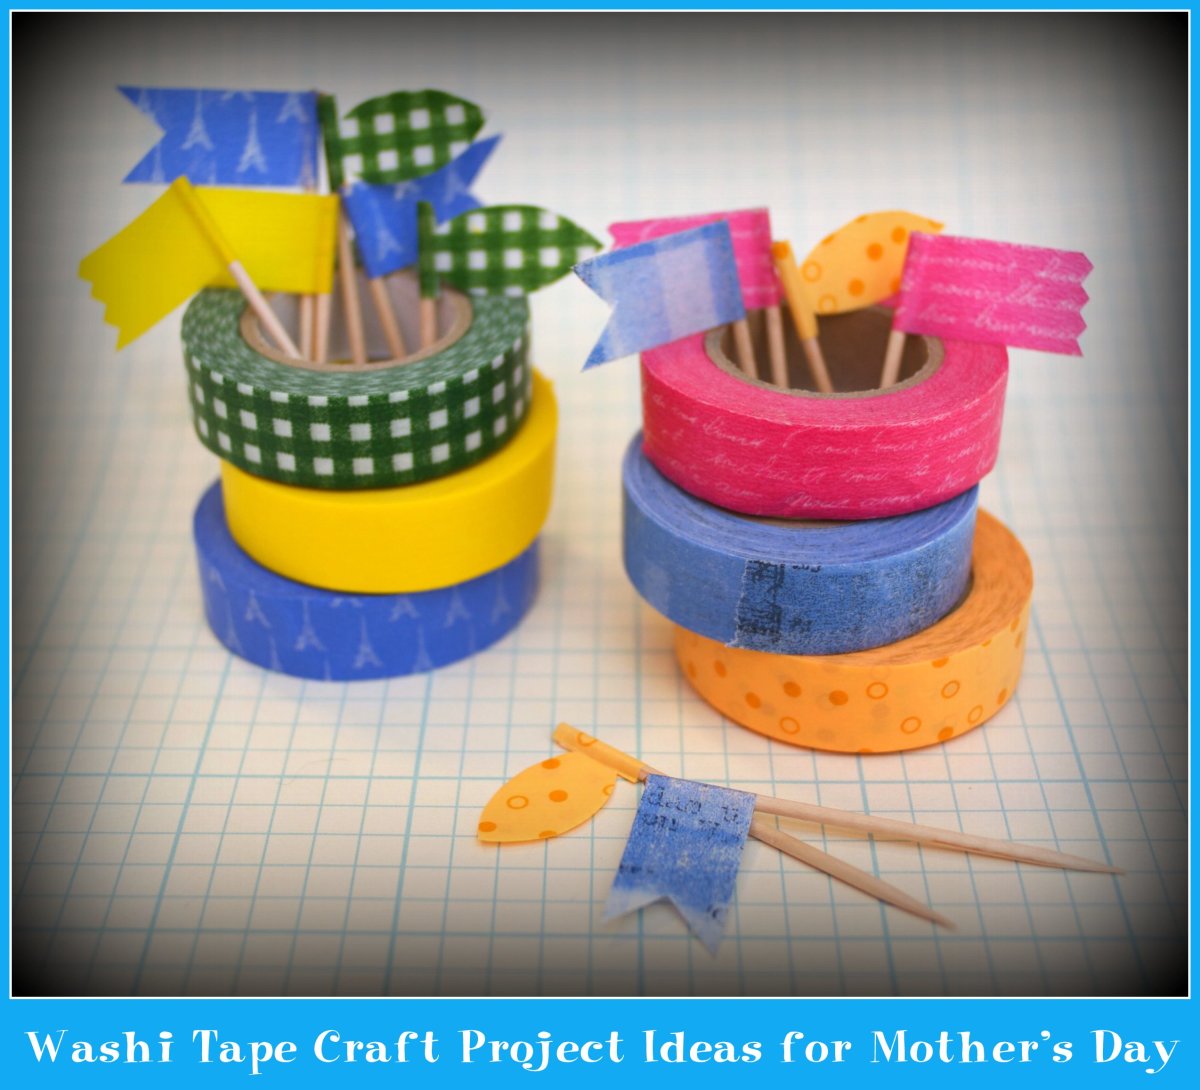 Washi Tape Craft Project Ideas for Mother's Day